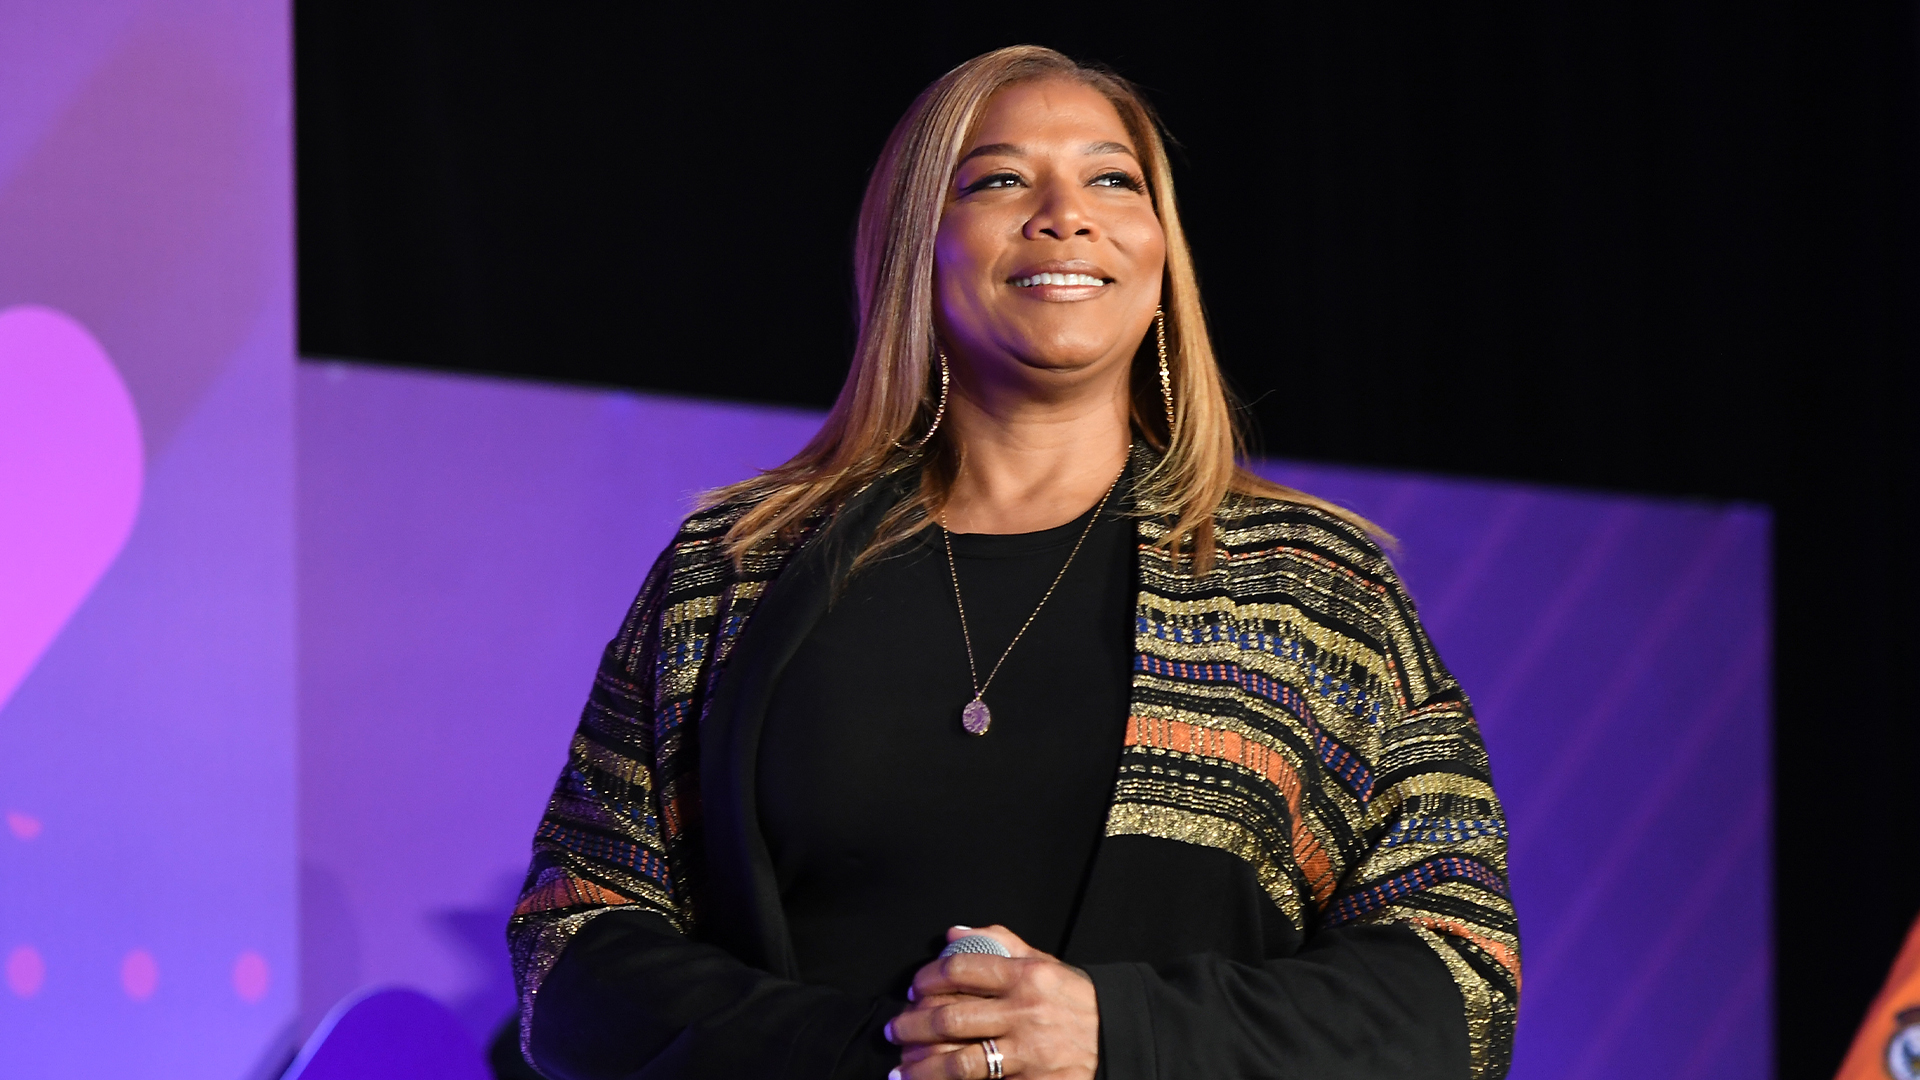 Queen Latifah's Real Estate Development Firm Set To Create New Affordable Housing In Her Hometown